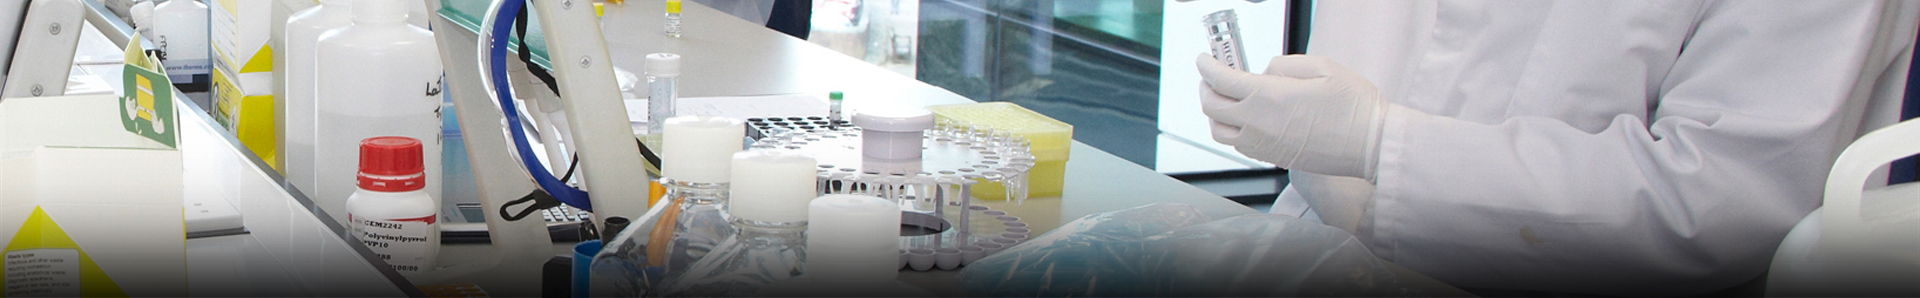 We deal in GC Columns & Supplies along with gas liquid chromatography & gas chromatography mass spectrometry.